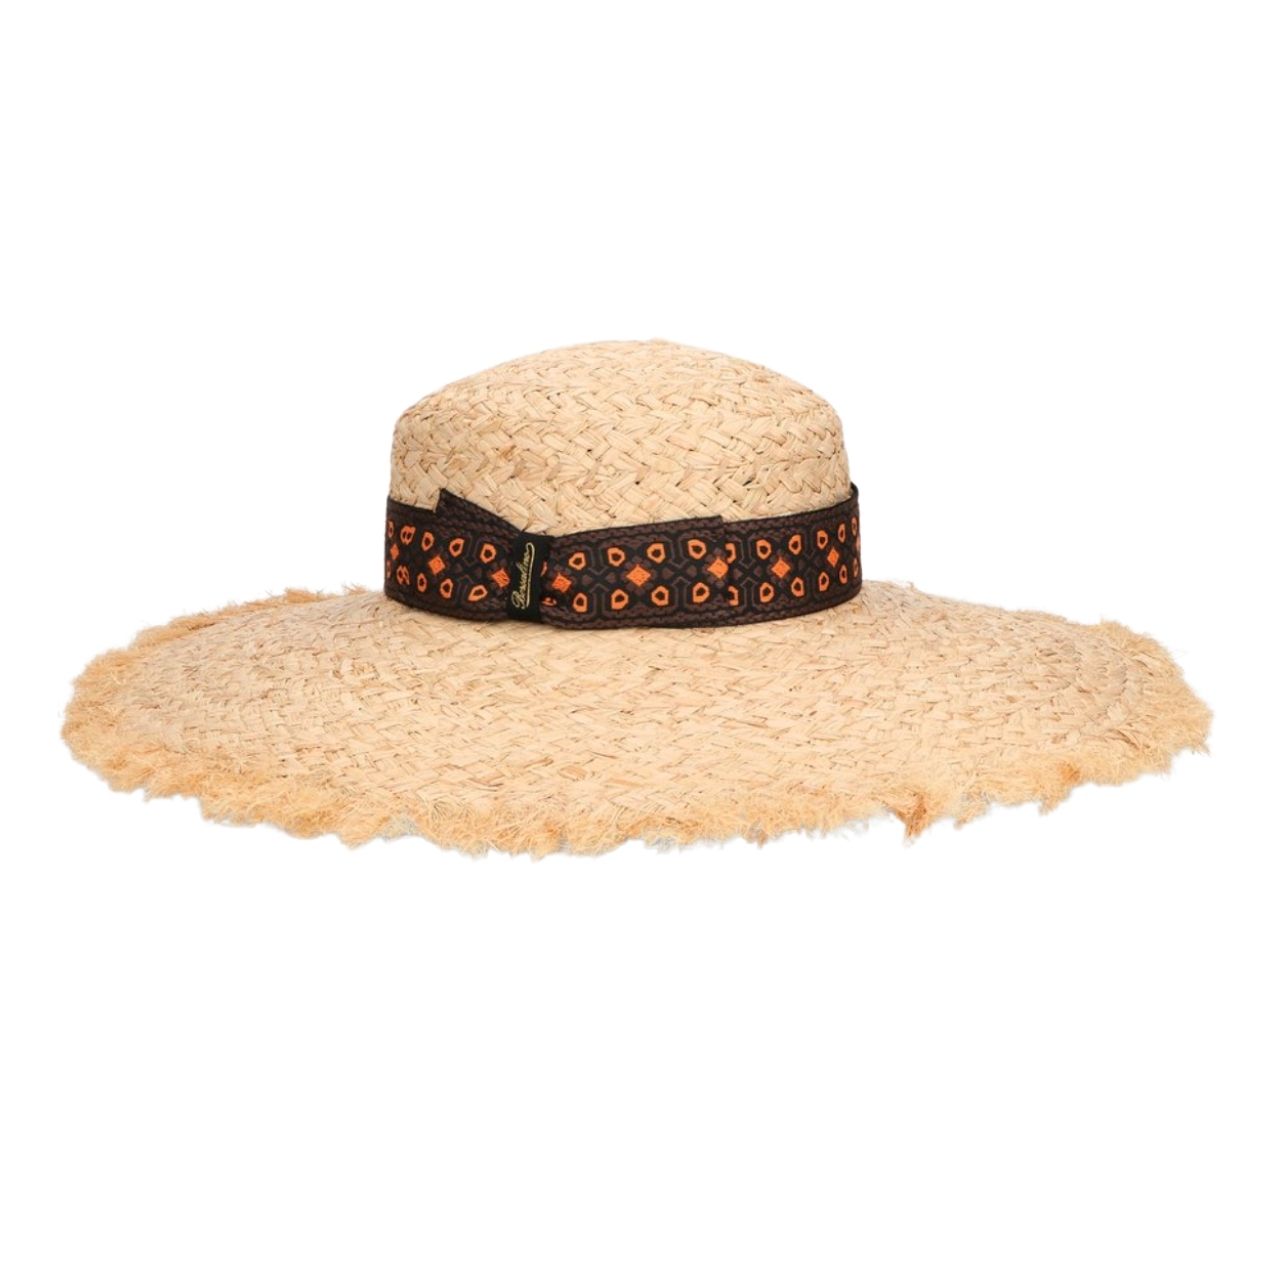 Straw hat with black band on the brim